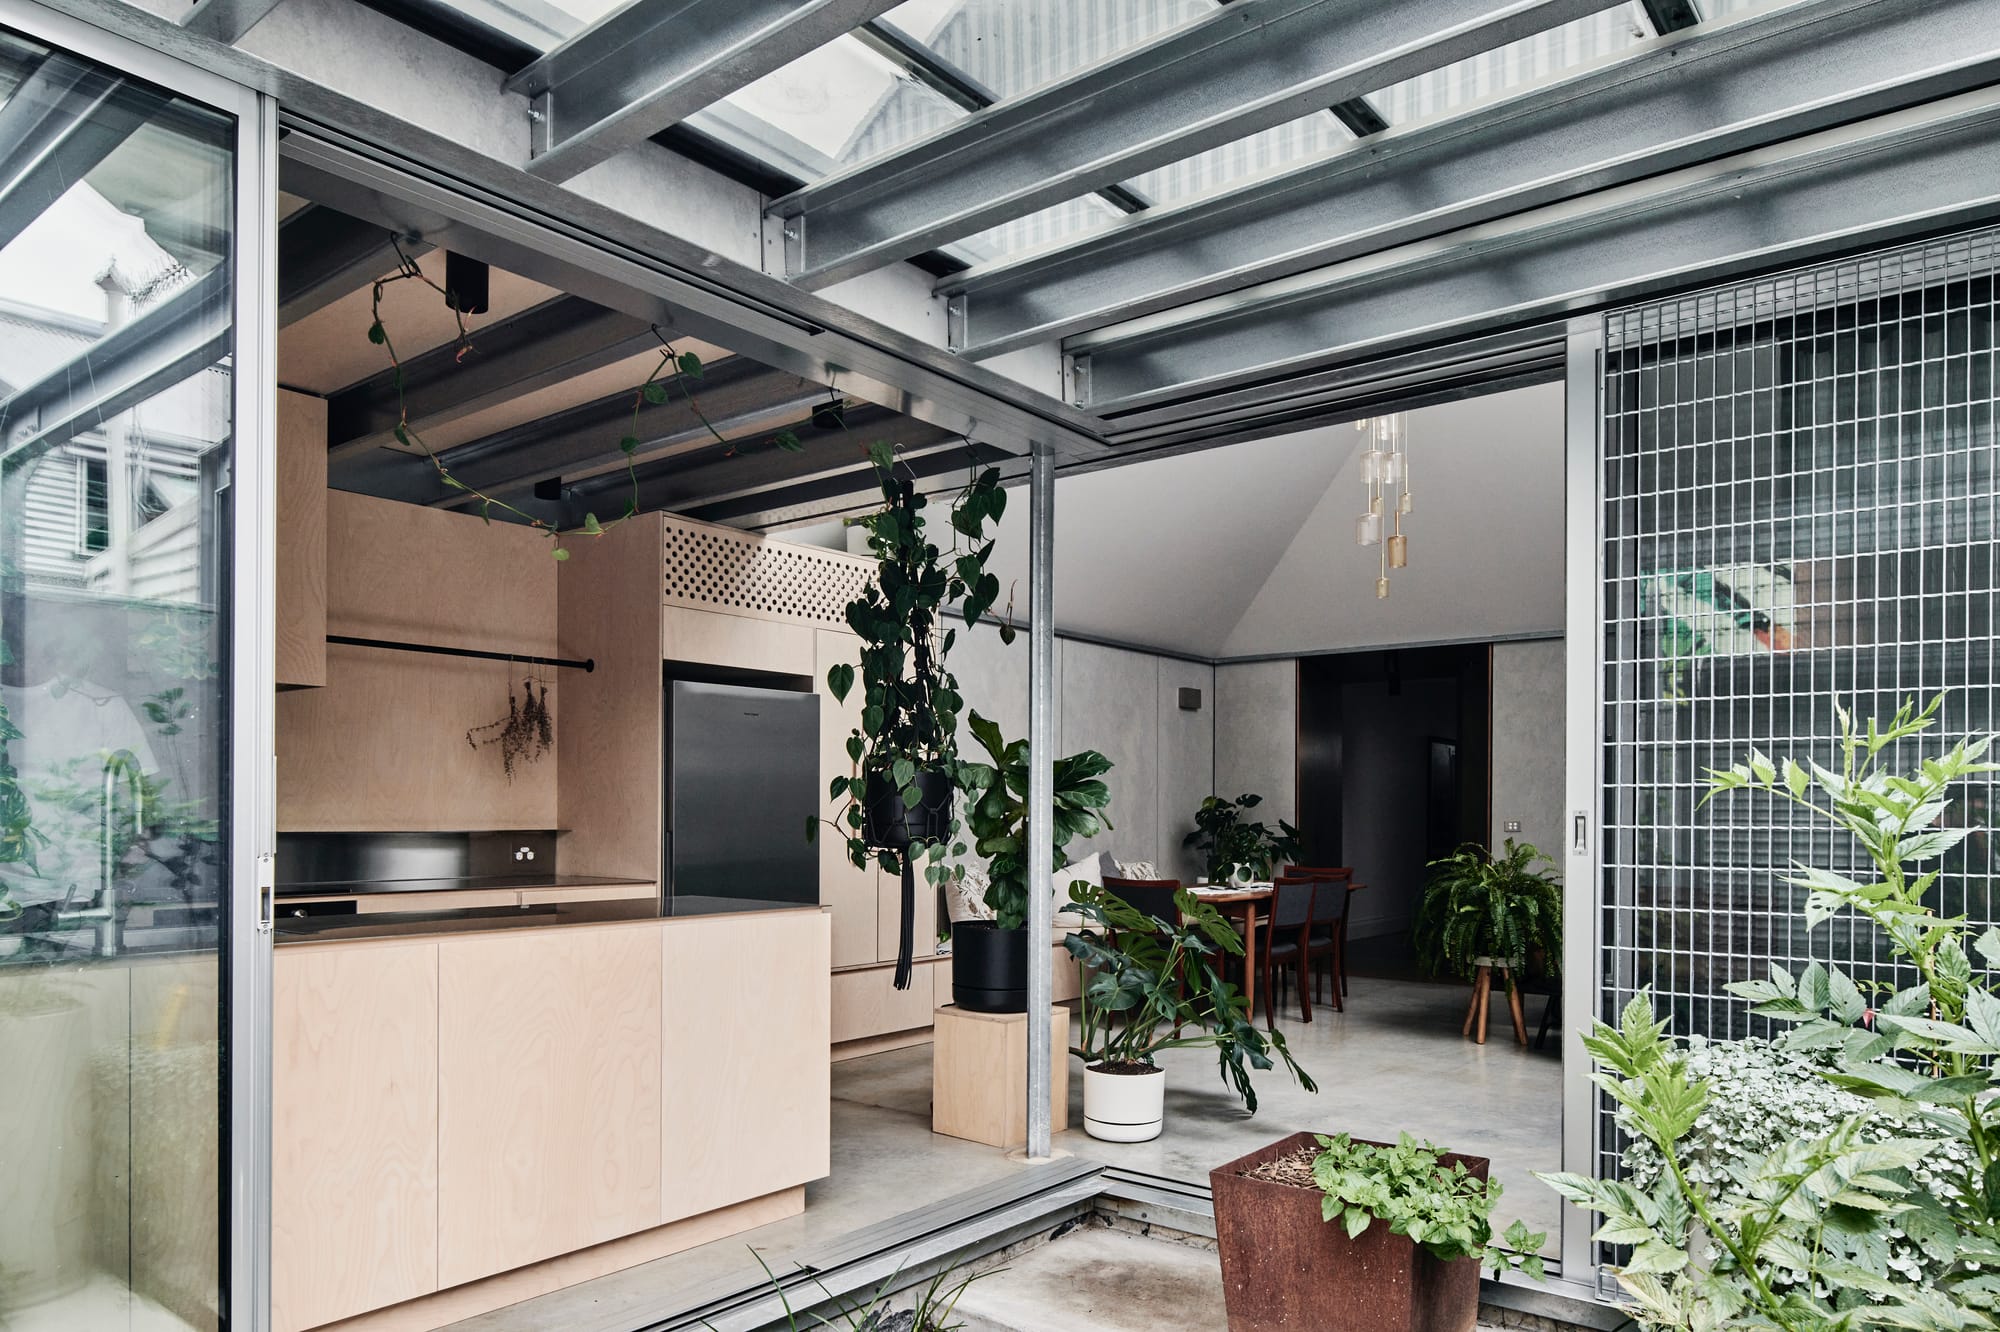 That Old Chestnut by FIGR. Architecture & Design. Photography by Tom Blachford. Landscape image of industrial-style kitchen and living space inside, and courtyard outside. Concrete floors inside, exposed steel beams outside. Plywood kitchen cabinetry. 